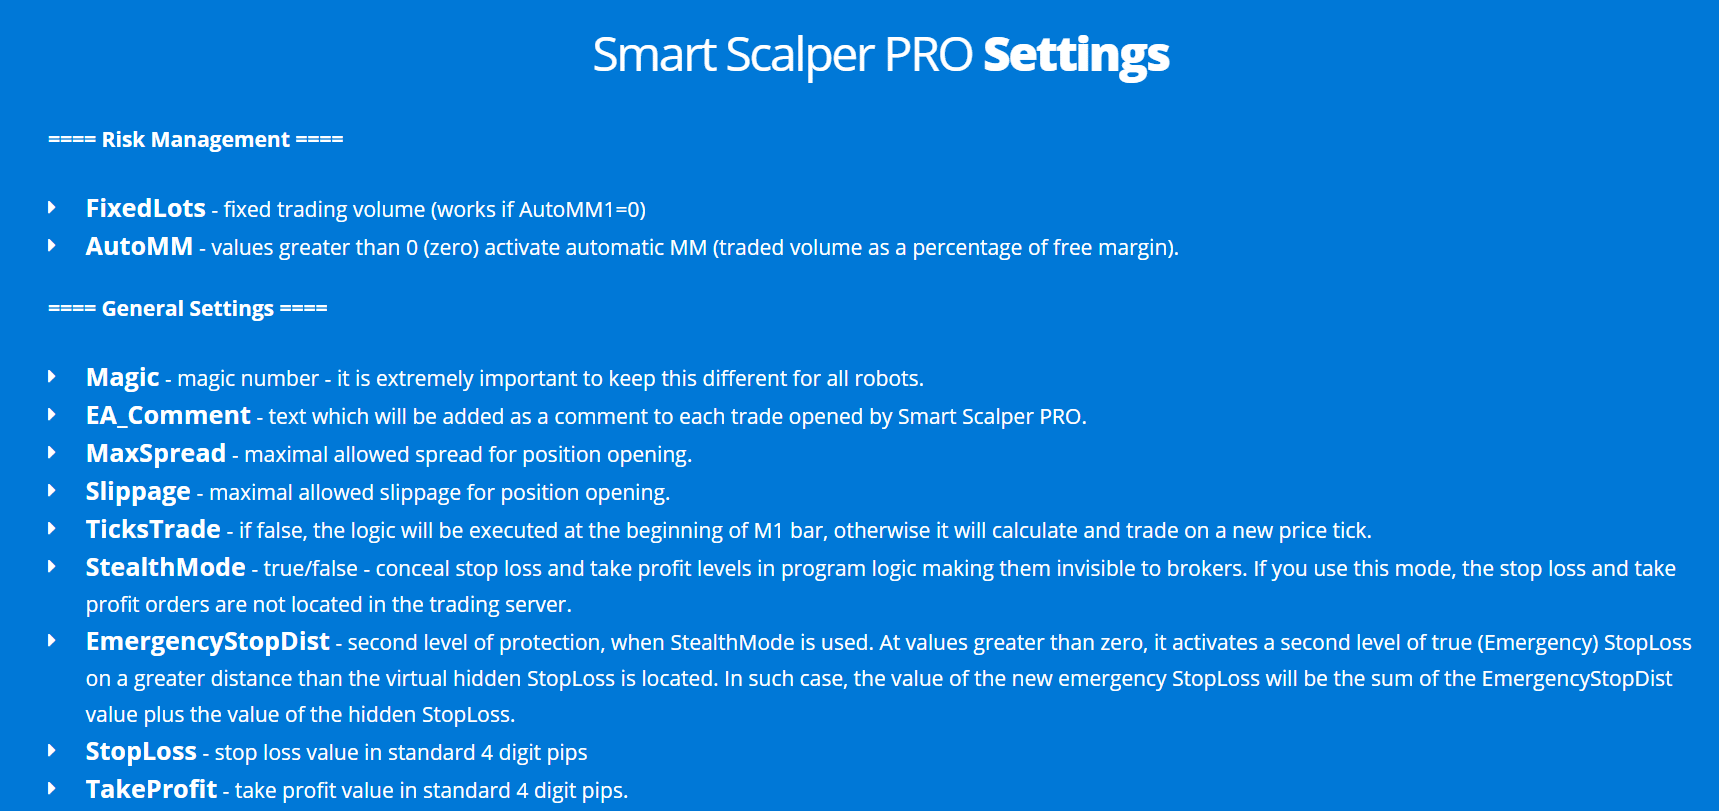 Smart Scalper Pro. FXAutomater always provides settings lists for its advisors.